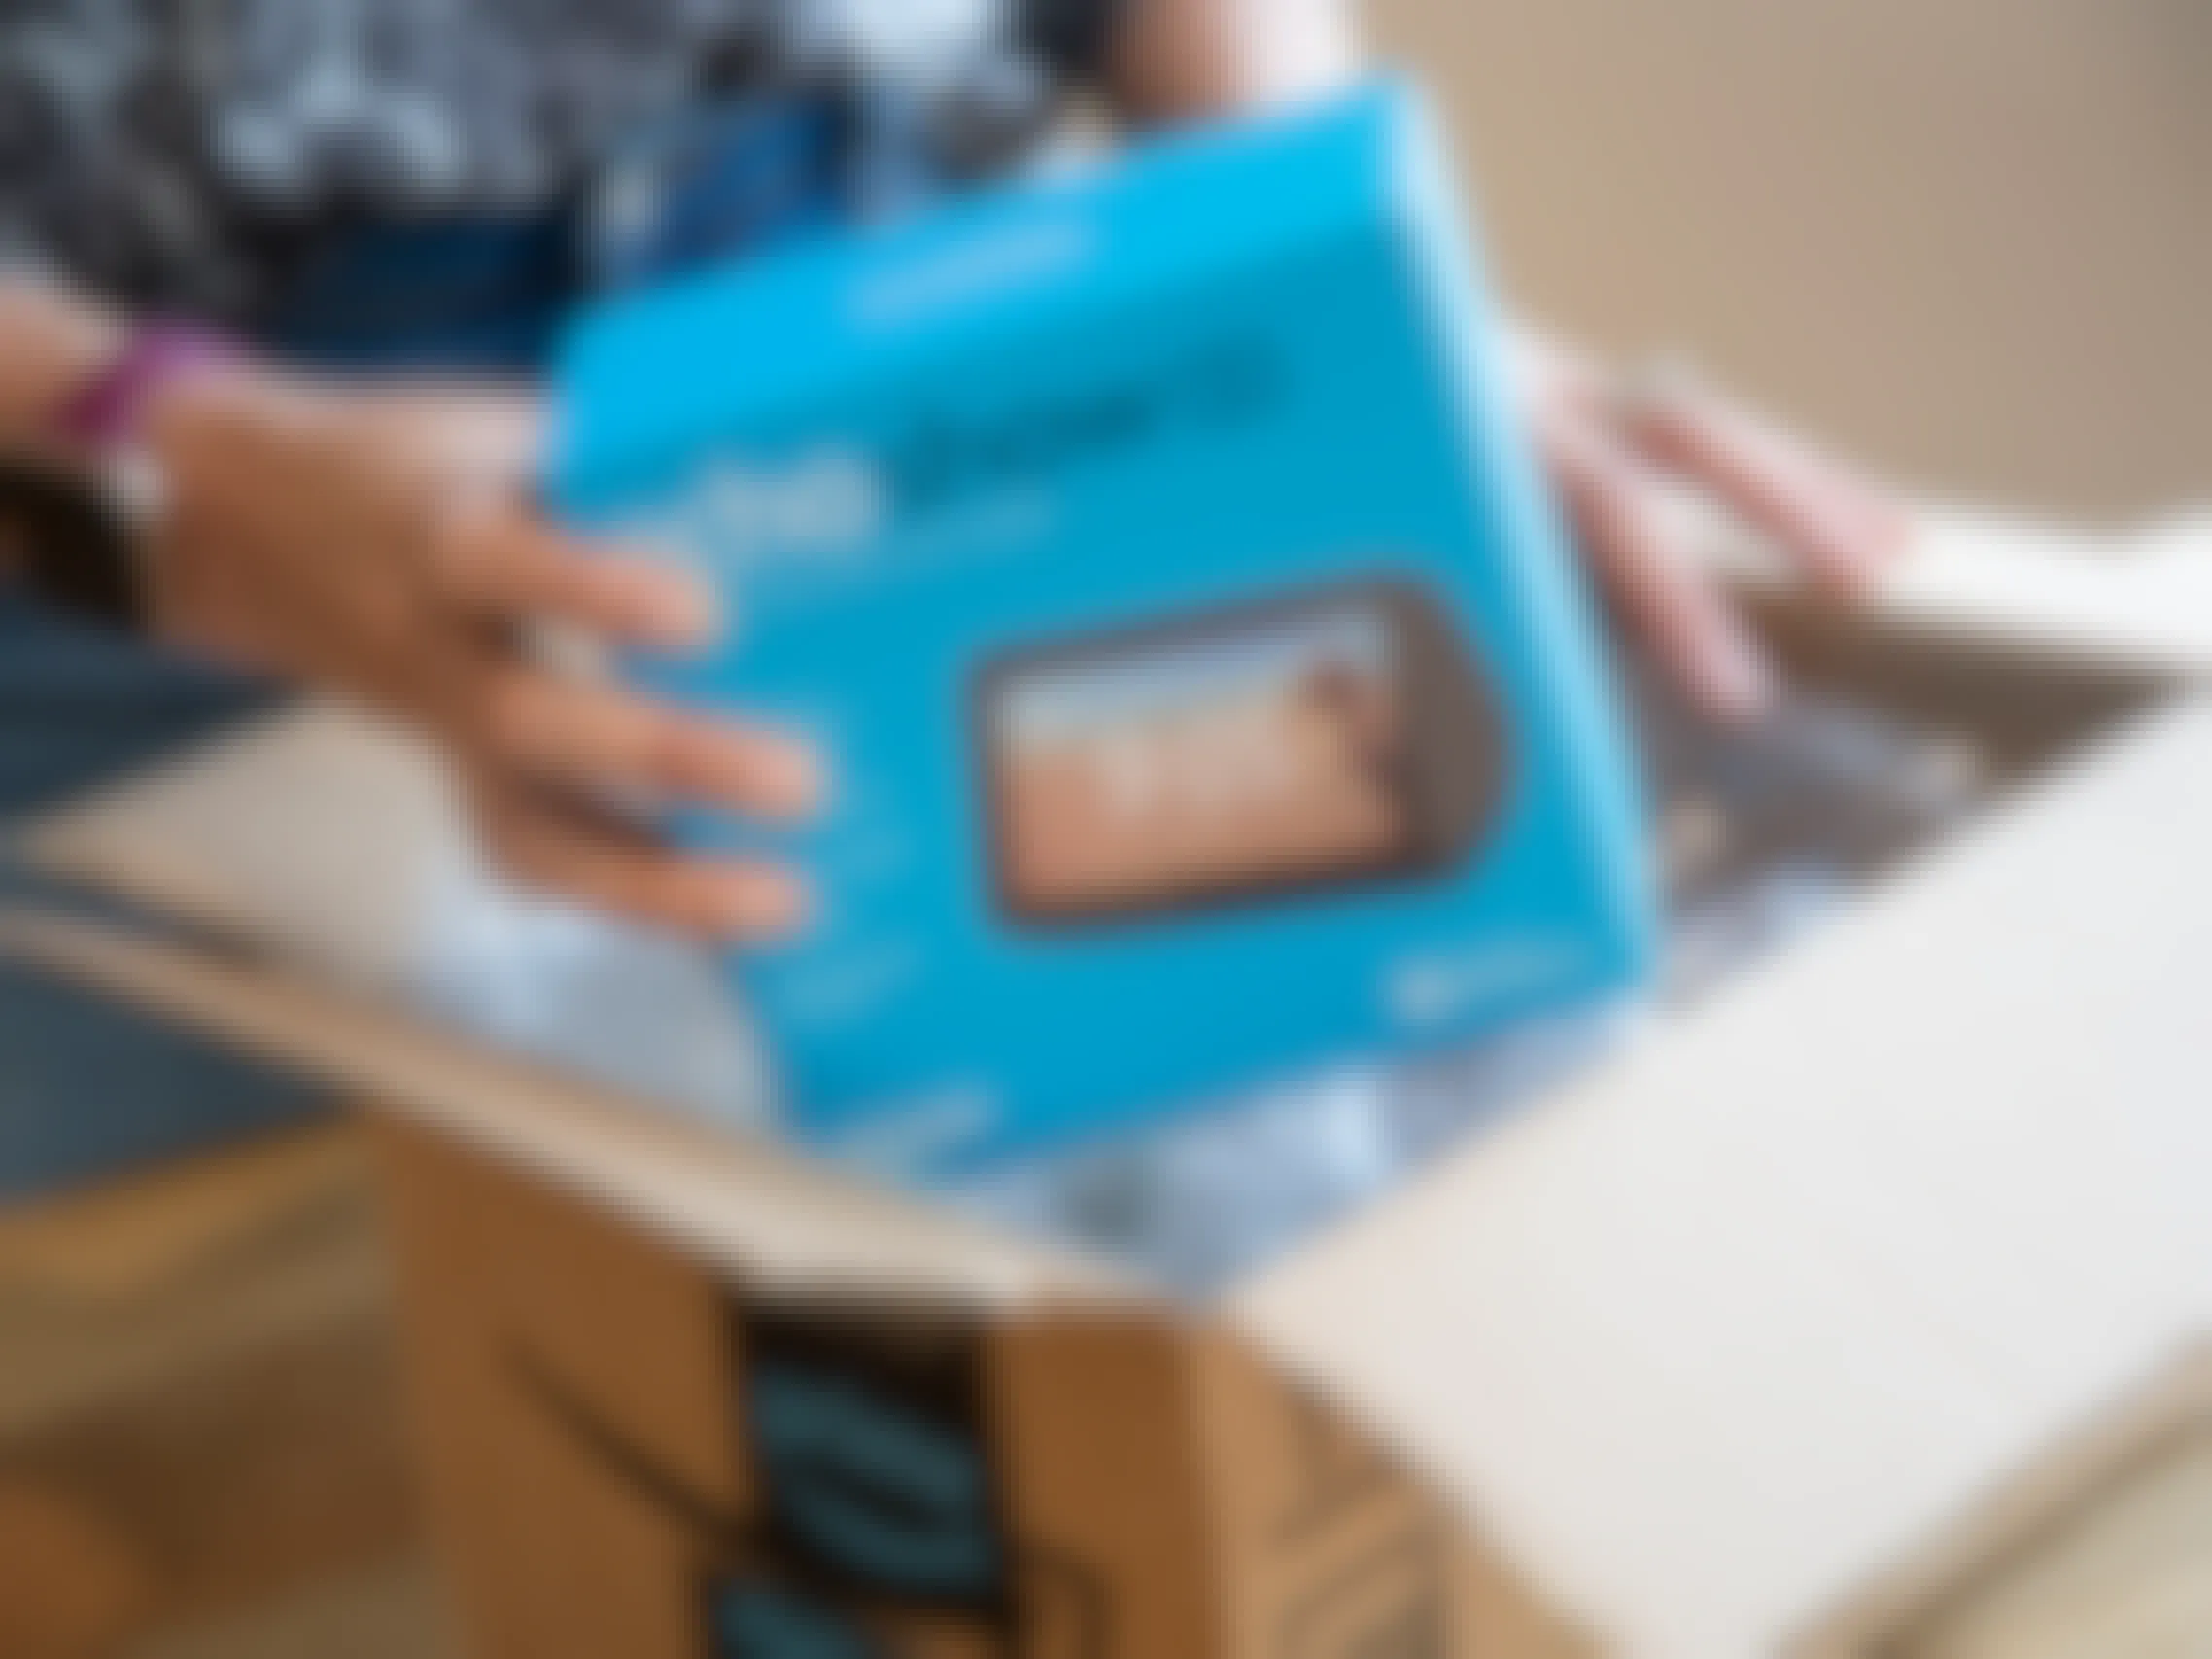 A person taking an Amazon Echo Show 5 out of an Amazon delivery box.